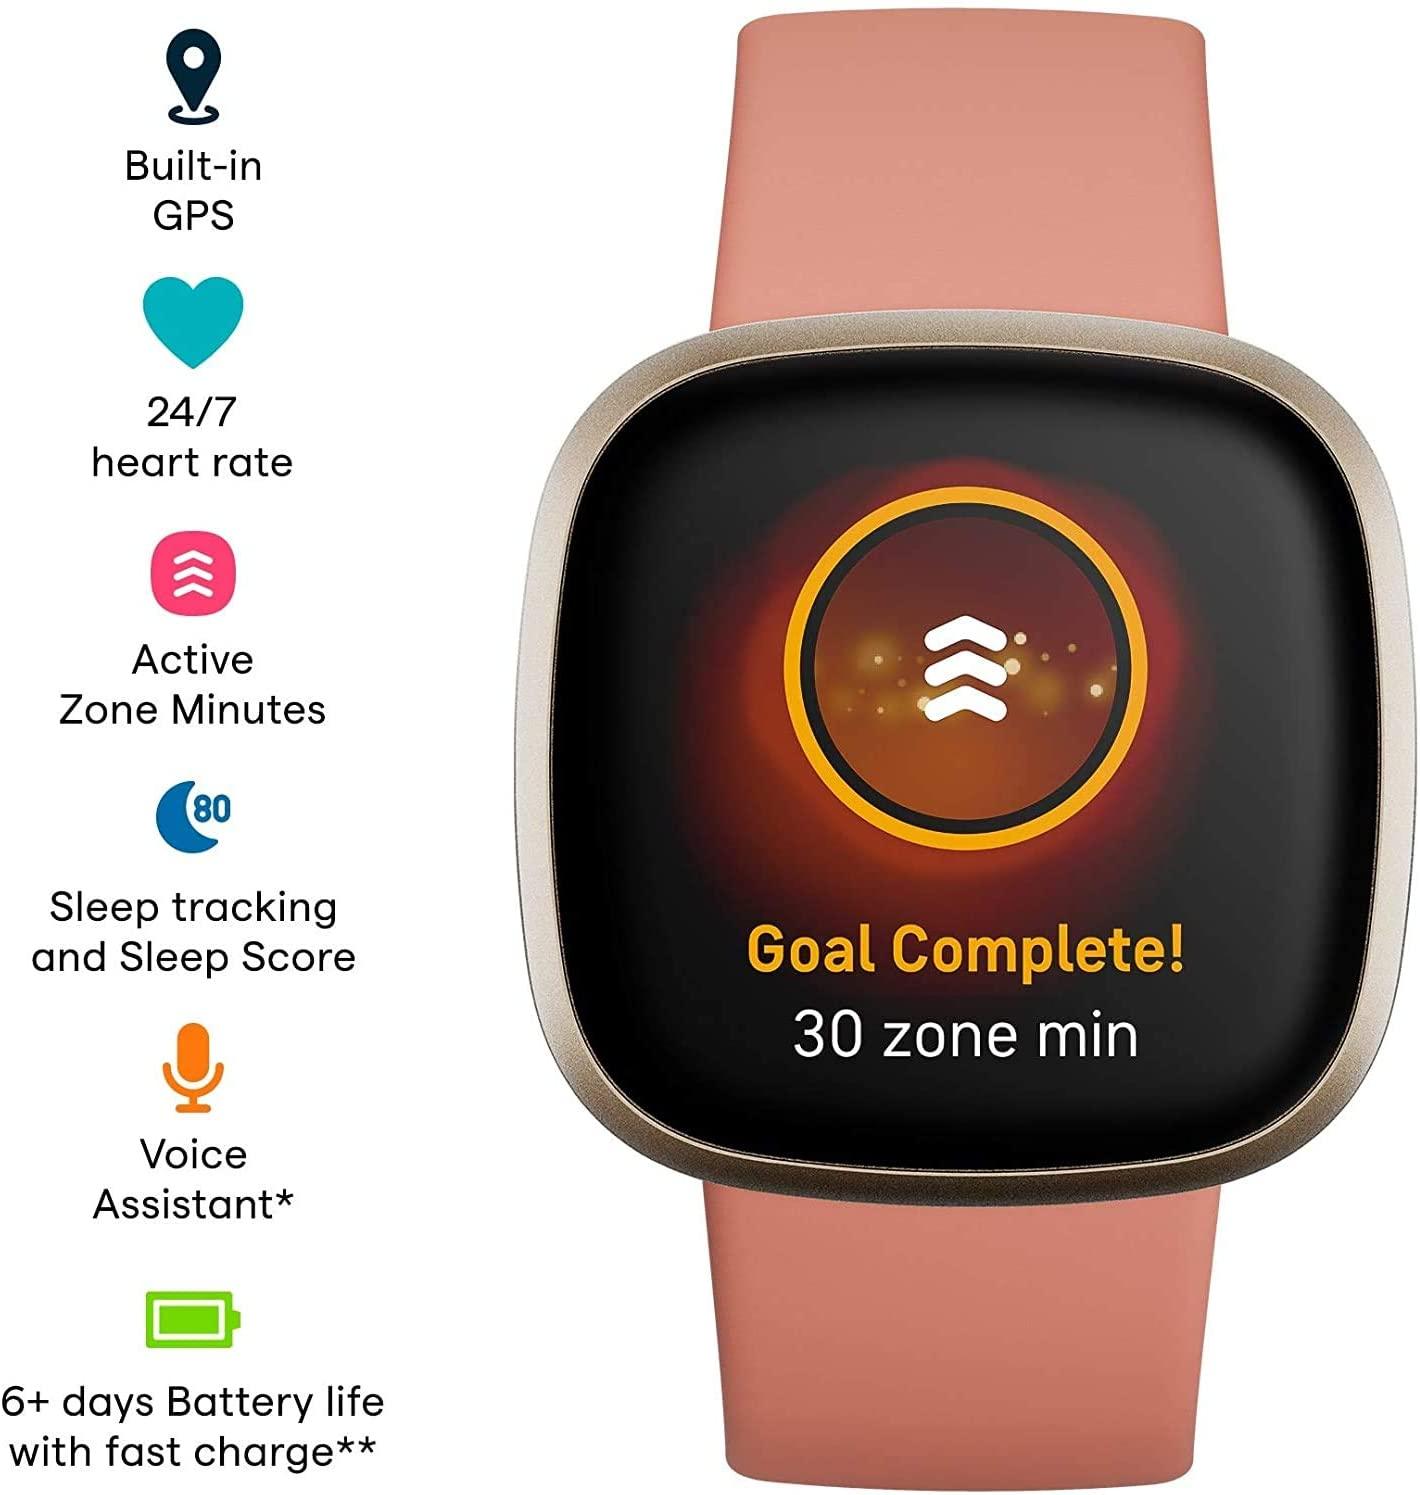 Fitbit Versa 3 Health & Fitness Smartwatch W/ Bluetooth Calls/Texts, Fast  Charging, GPS, Heart Rate SpO2, 6+ Days Battery (S & L Bands, 90 Day  Premium Included) International Version (Pink/Gold)